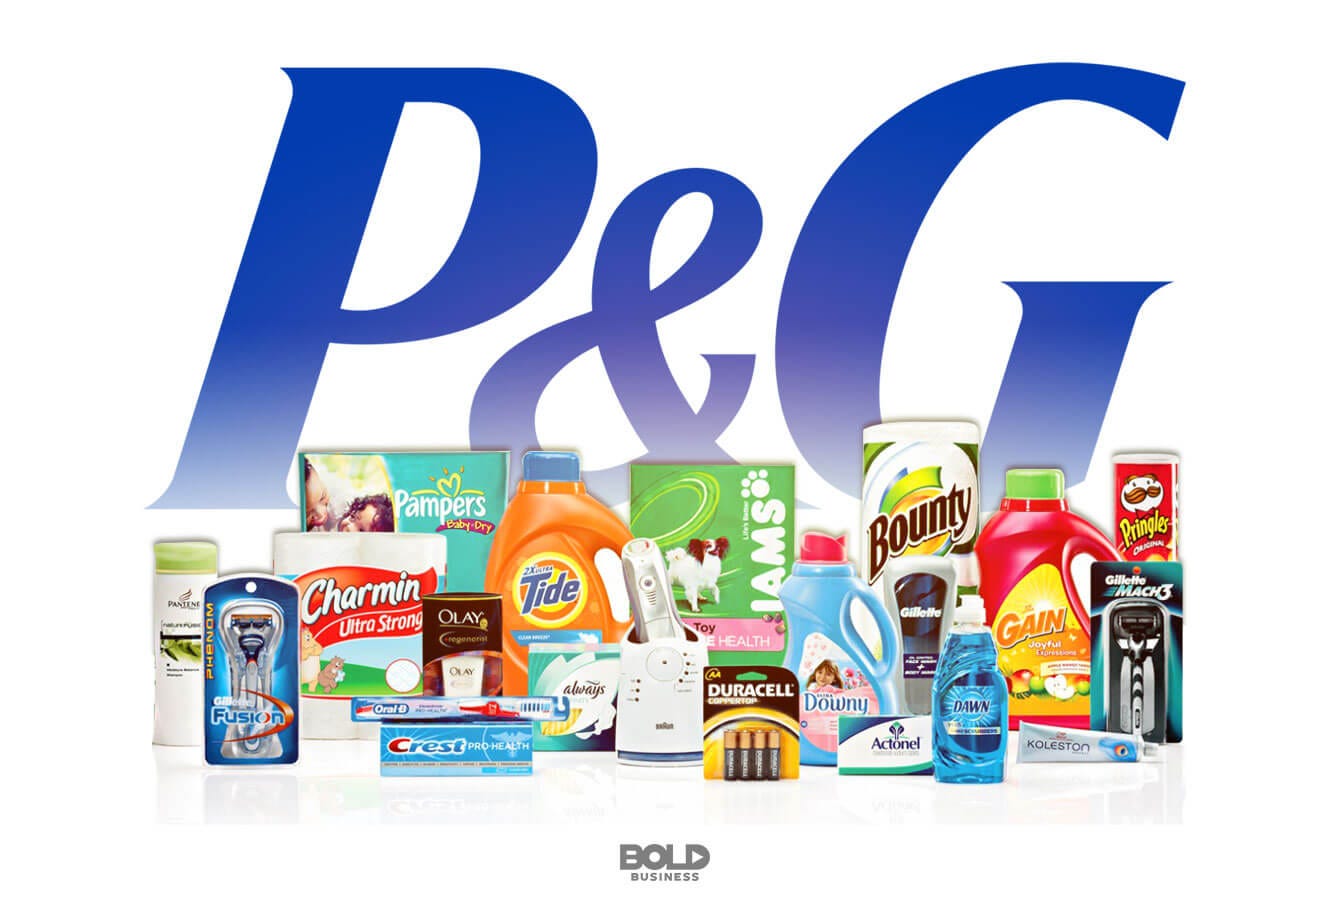 Procter and Gamble Innovation Strategy under David Taylor